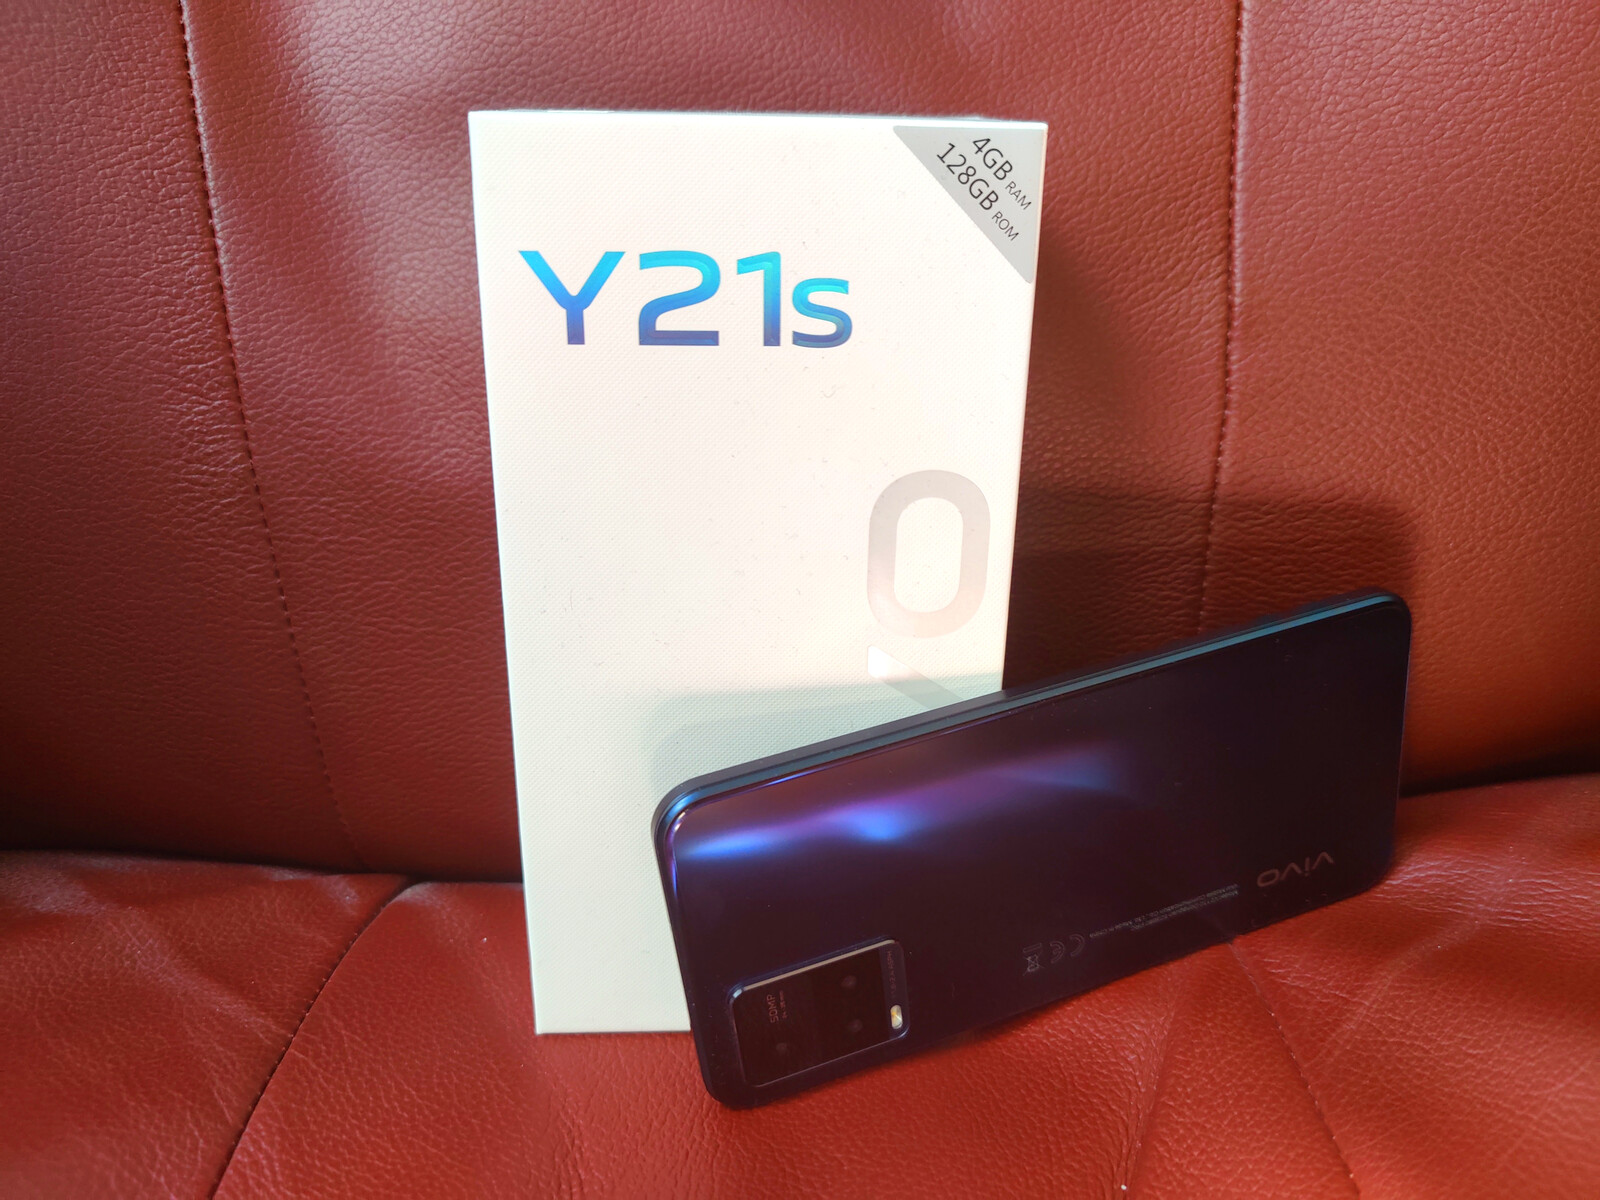 Y21s smartphone review - Slim and light fast charging - NotebookCheck.net